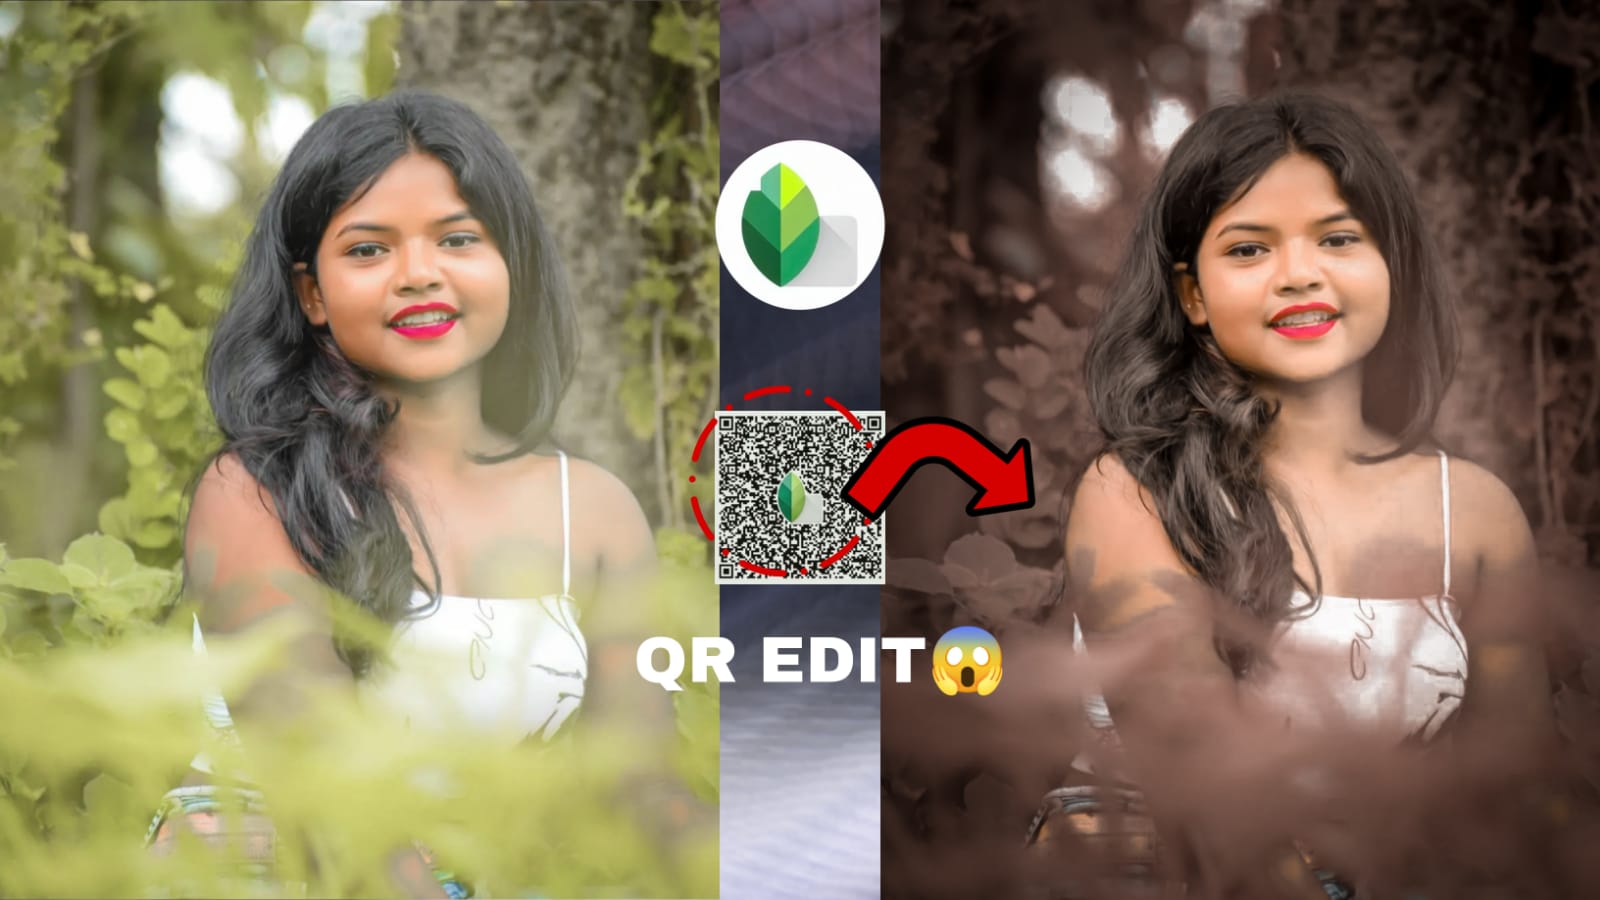 snapseed photo editing presets download light brown qr code download for snapseed photo editing